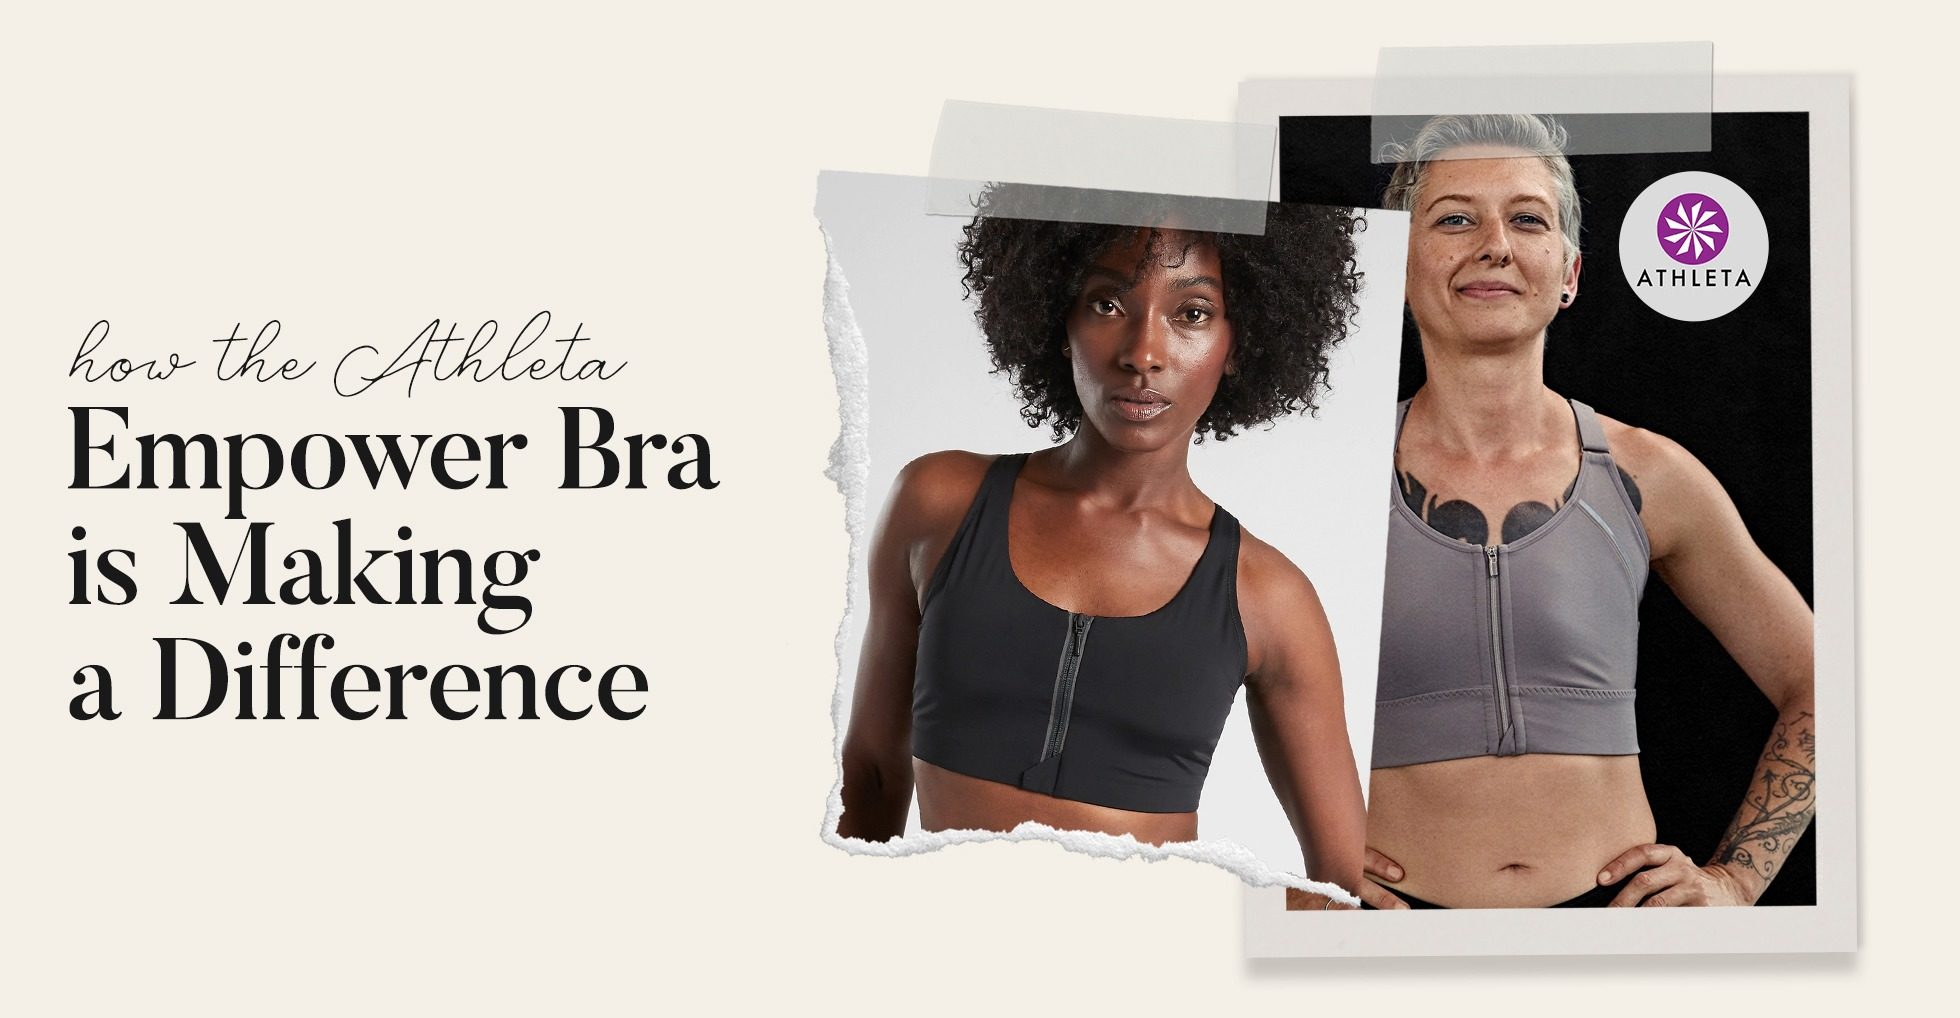 How The Athleta Empower Bra is Making a Difference for Breast Cancer Survivors